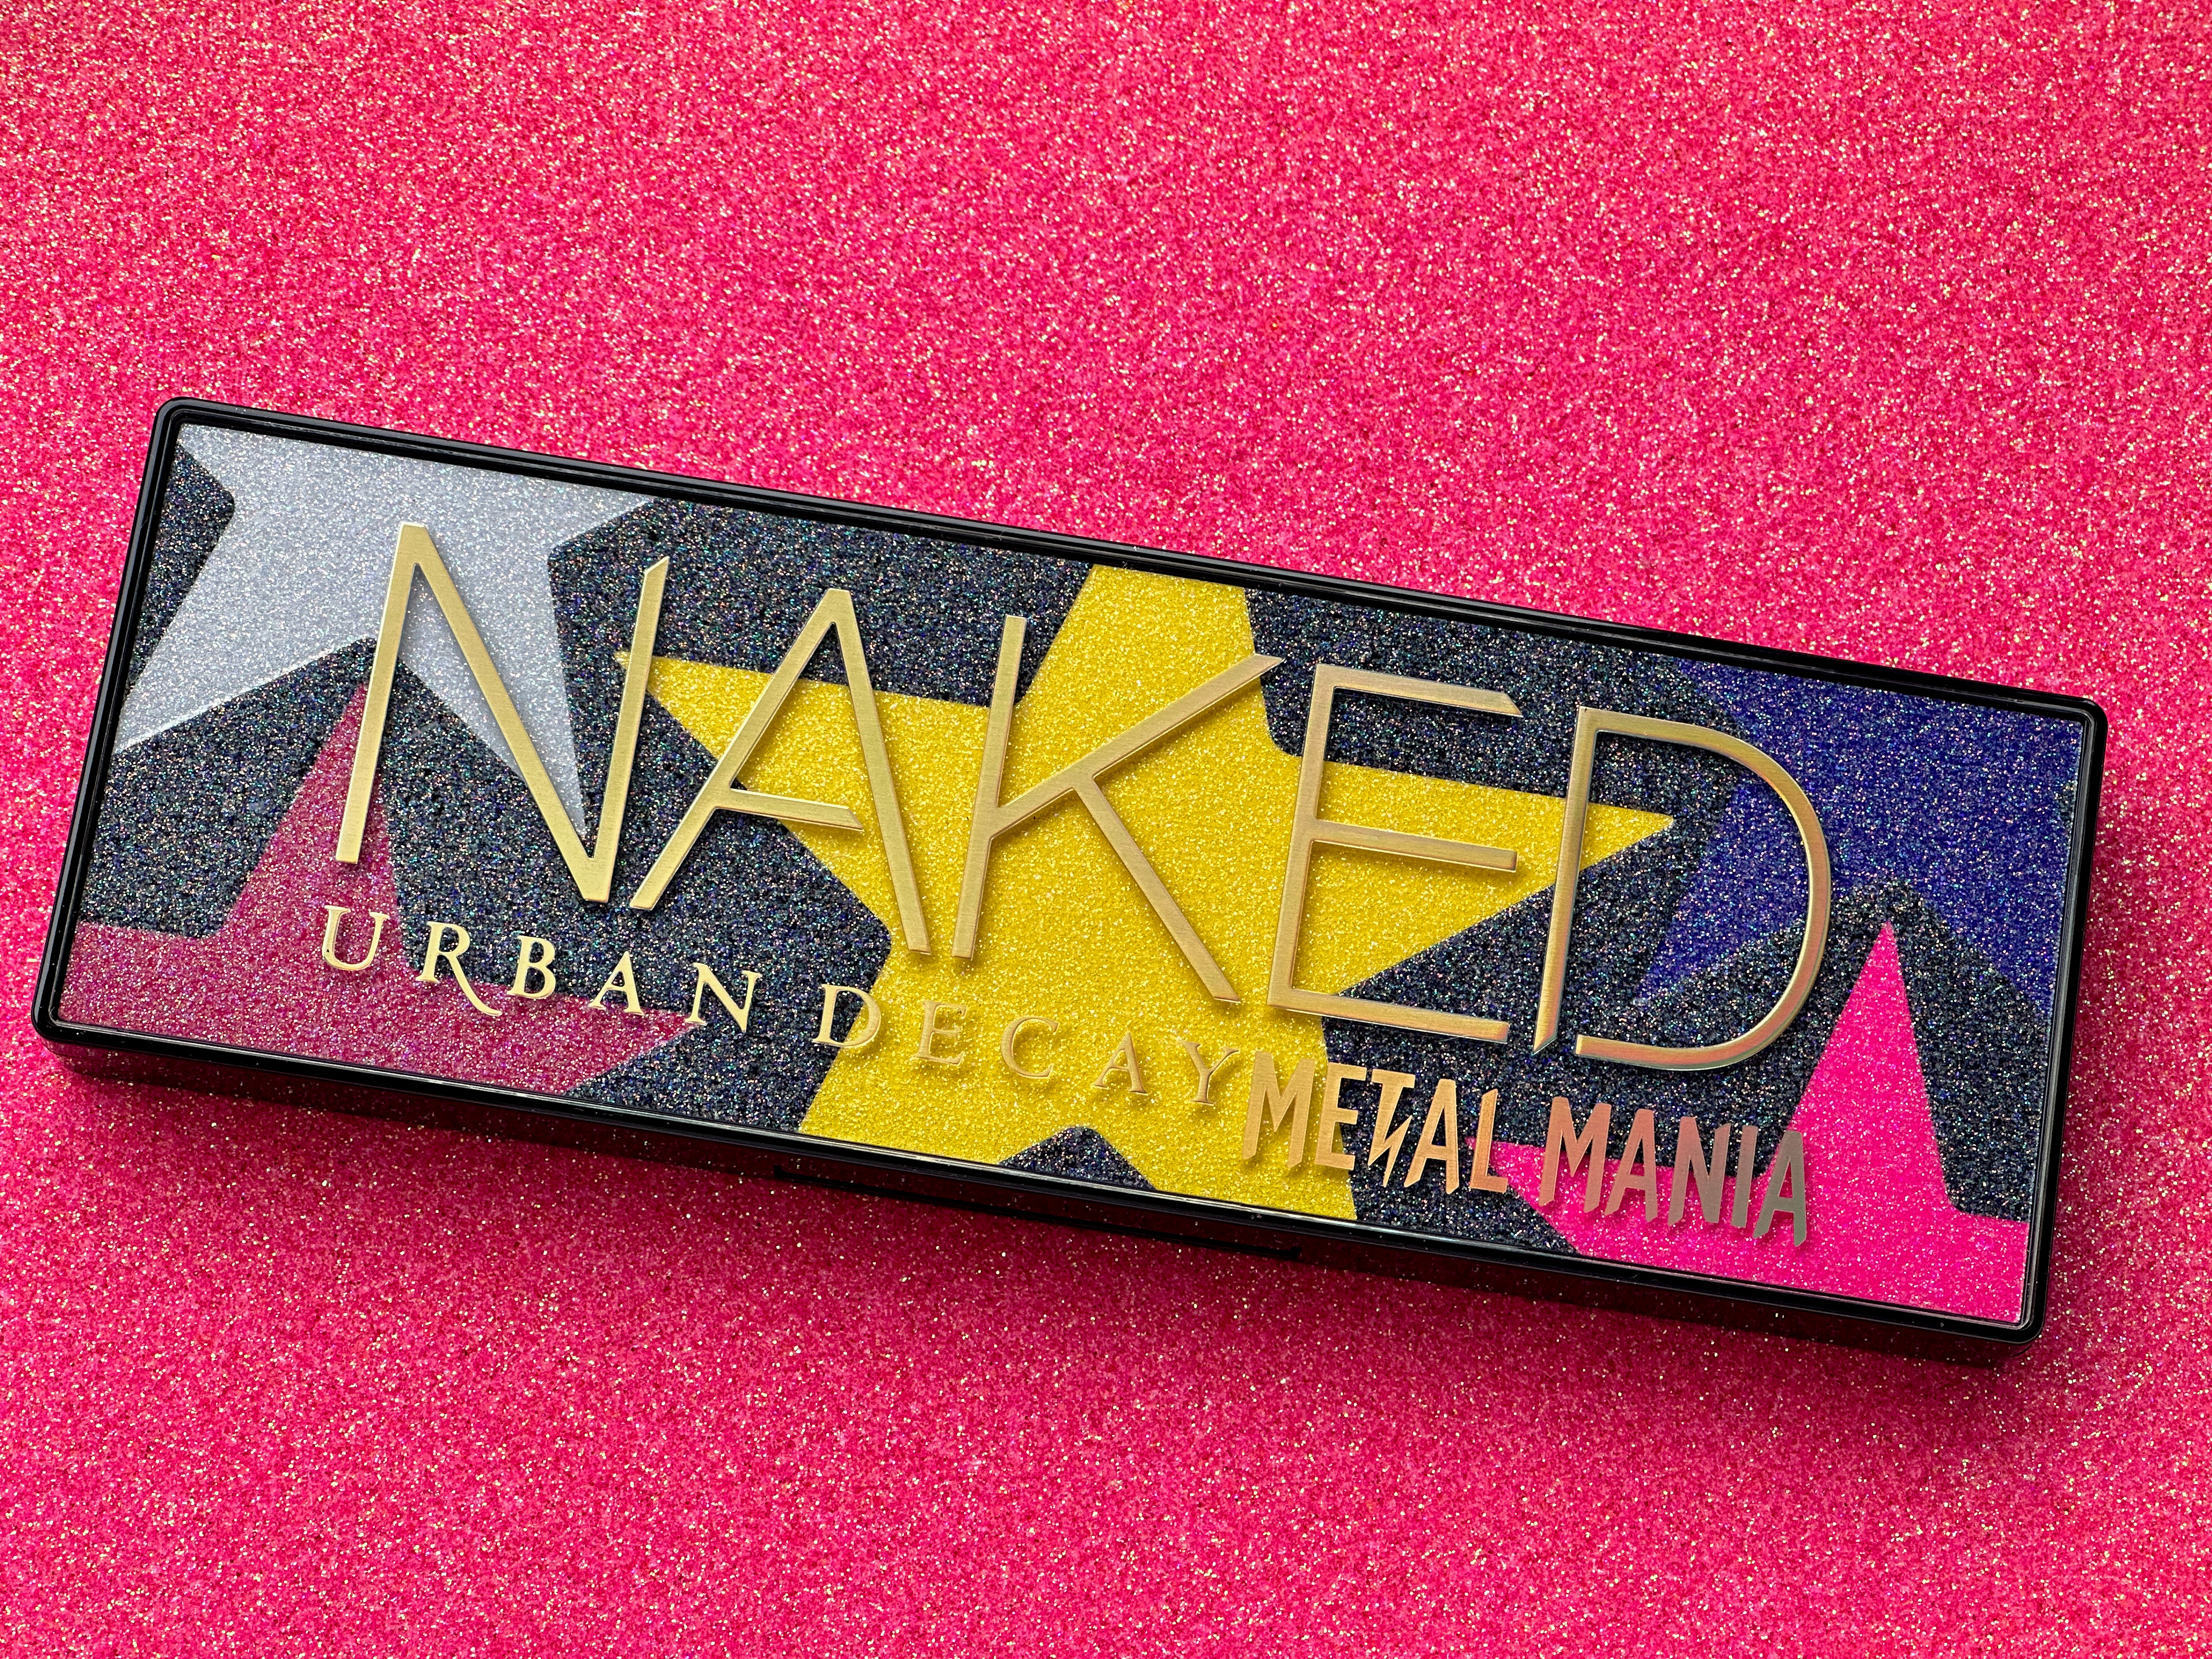 Naked Metal Mania Eyeshadow Palette Review & Swatches